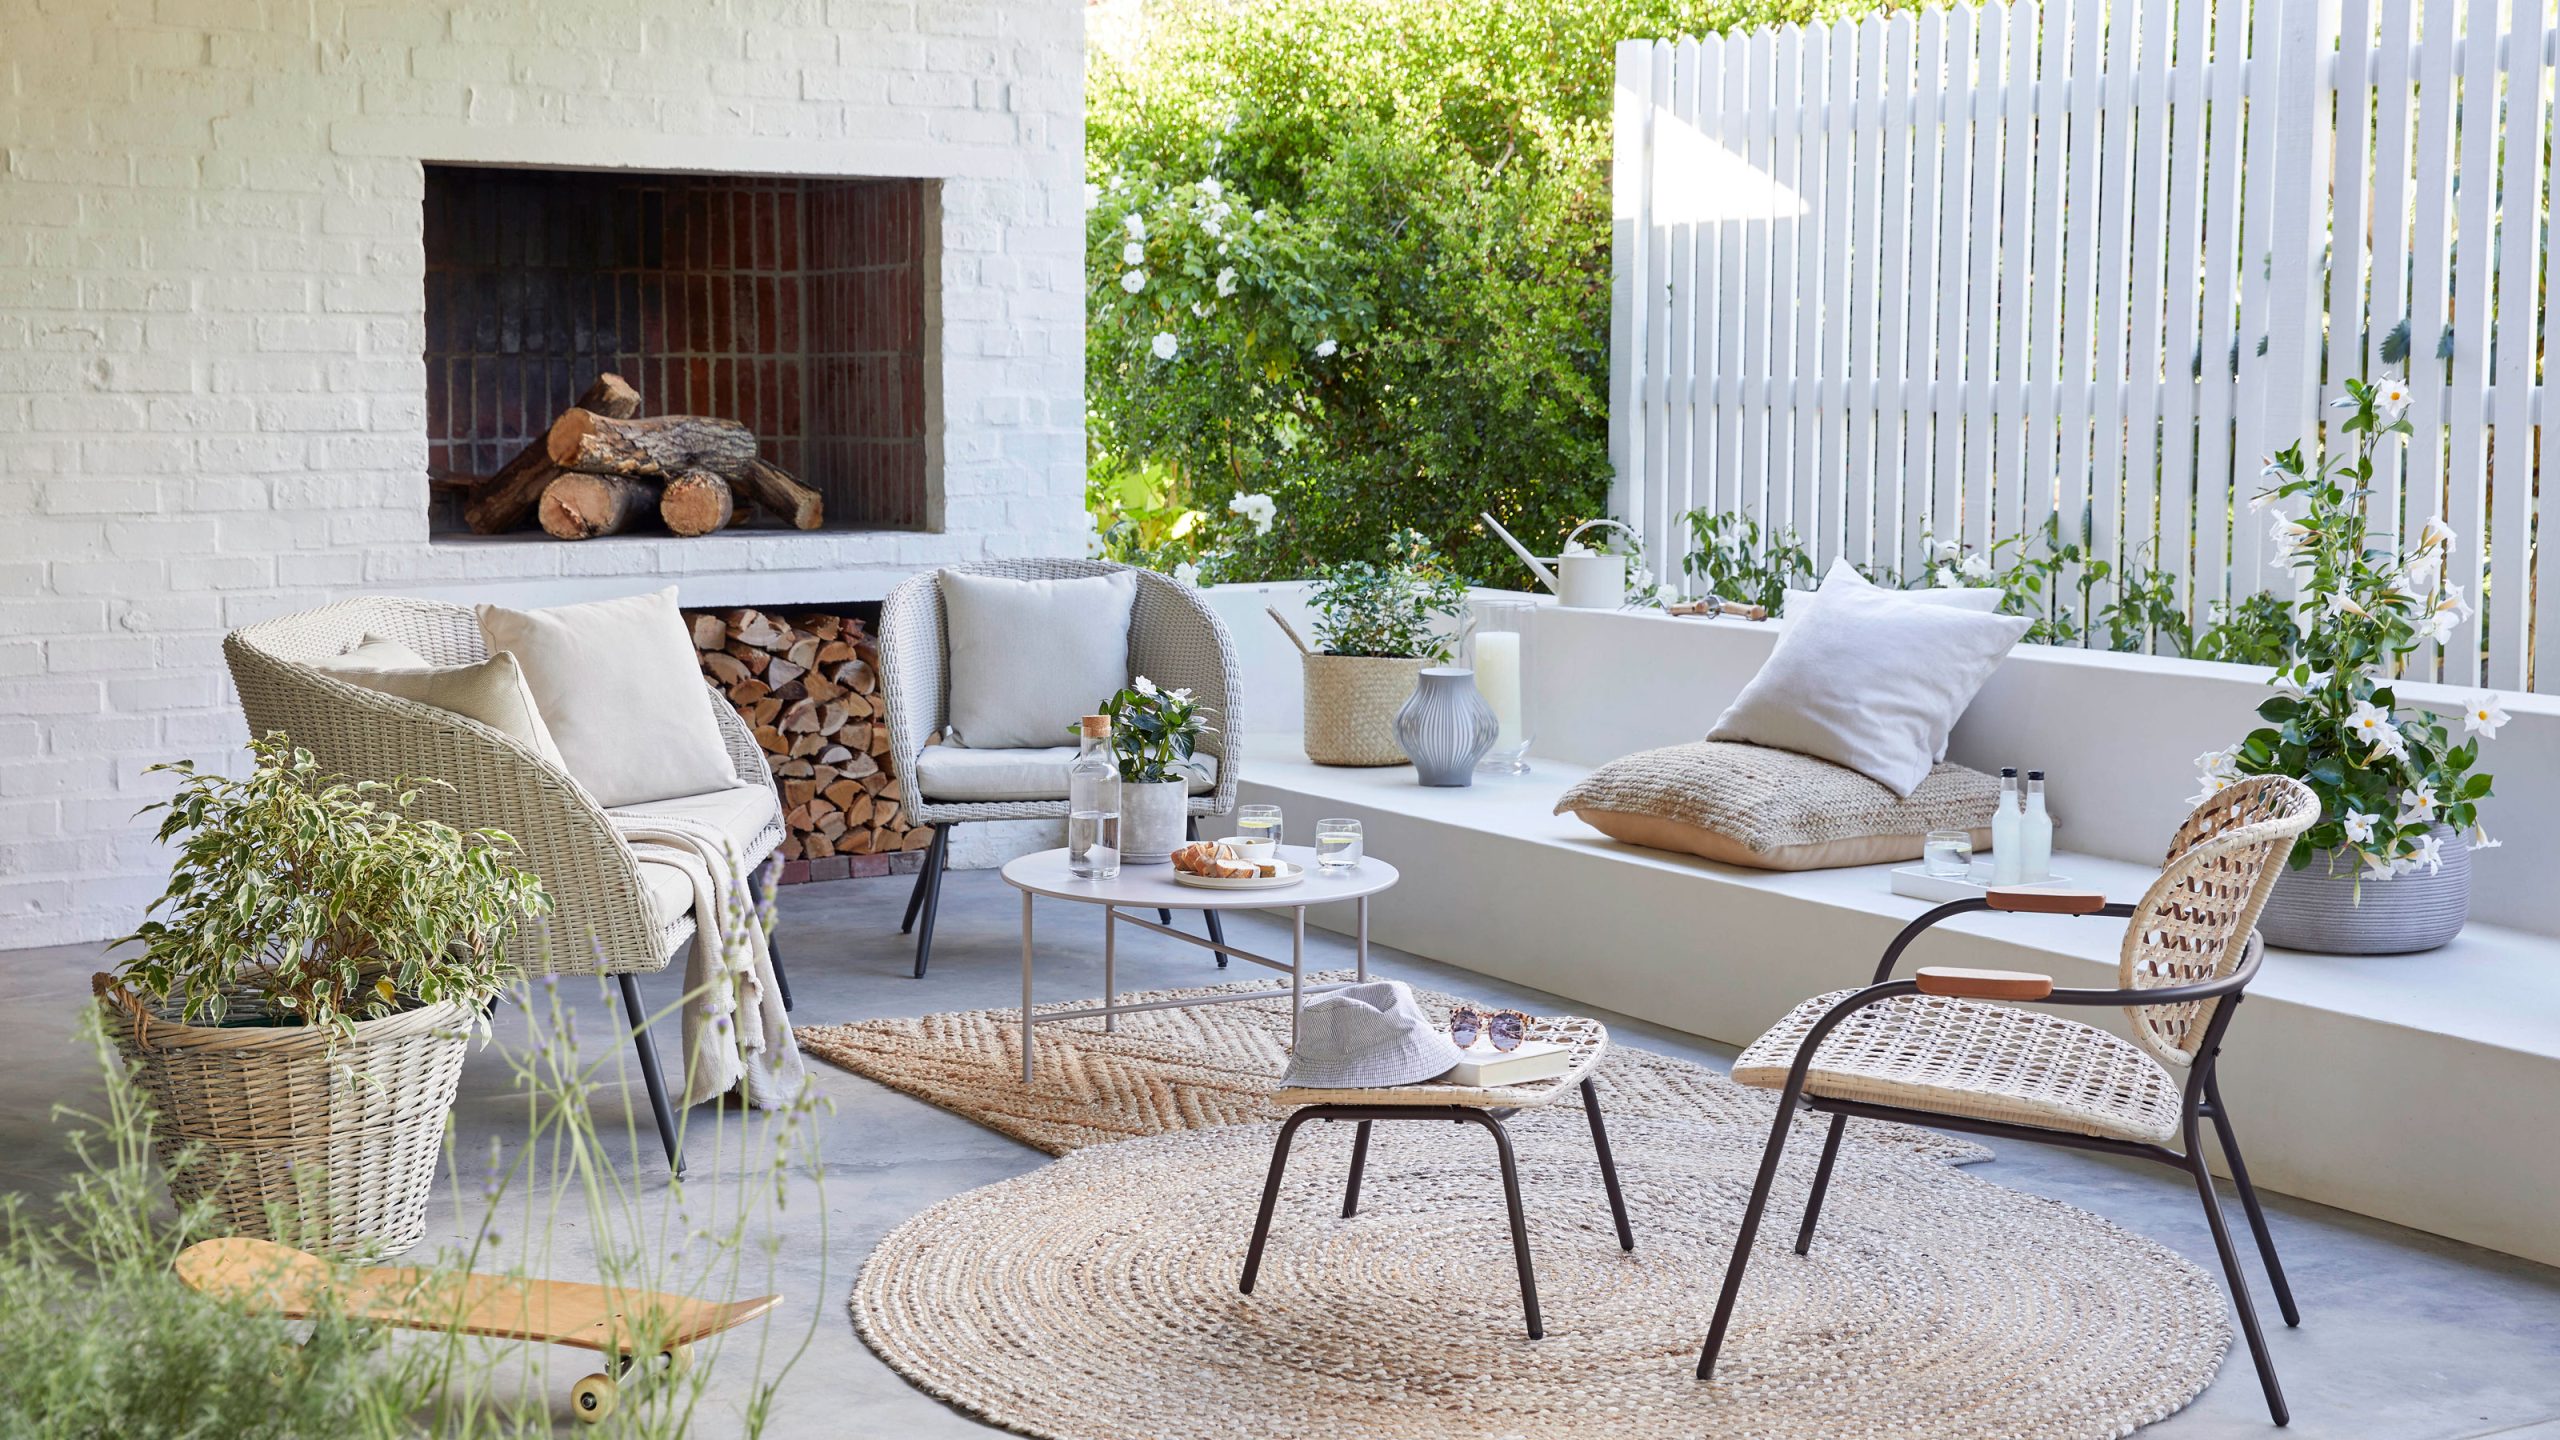 How to Prevent Bird Poop on Patio Furniture